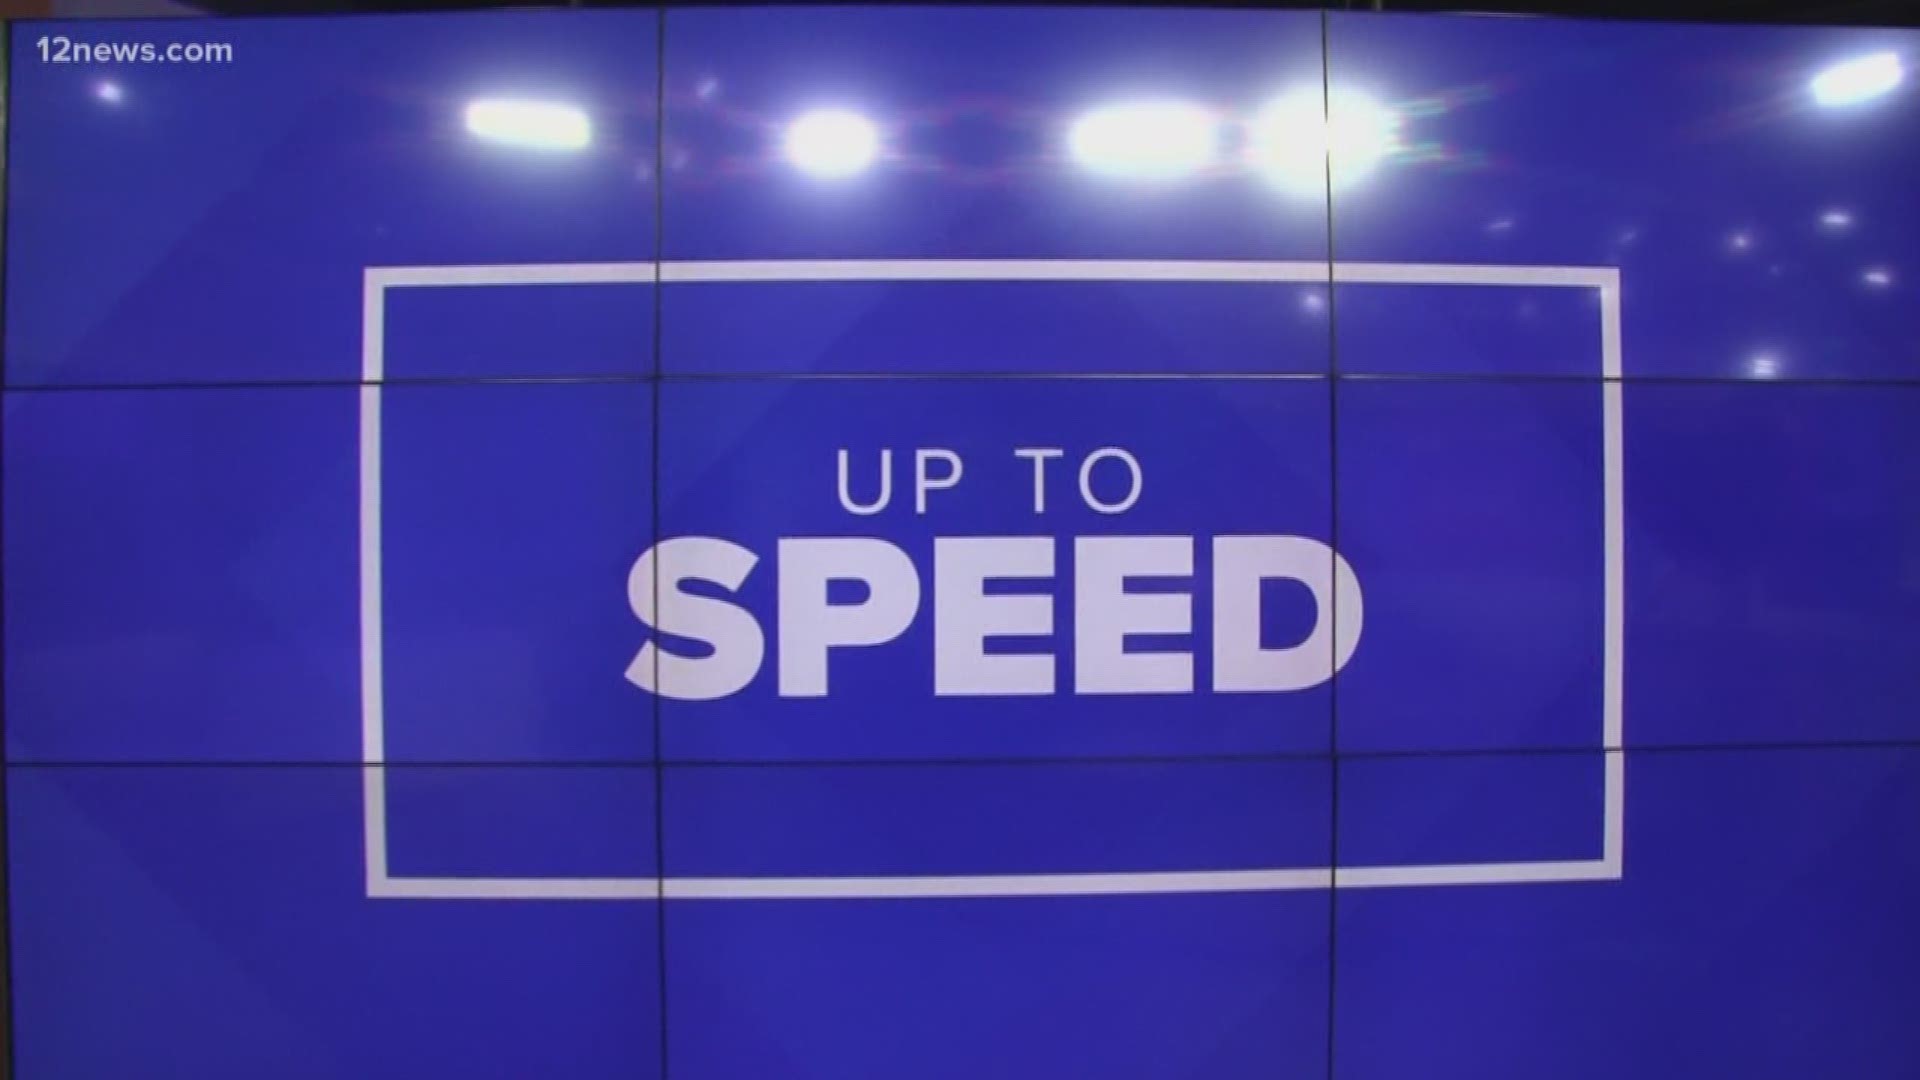 We get you "Up to Speed" on the latest news stories happening around the Valley and across the country.